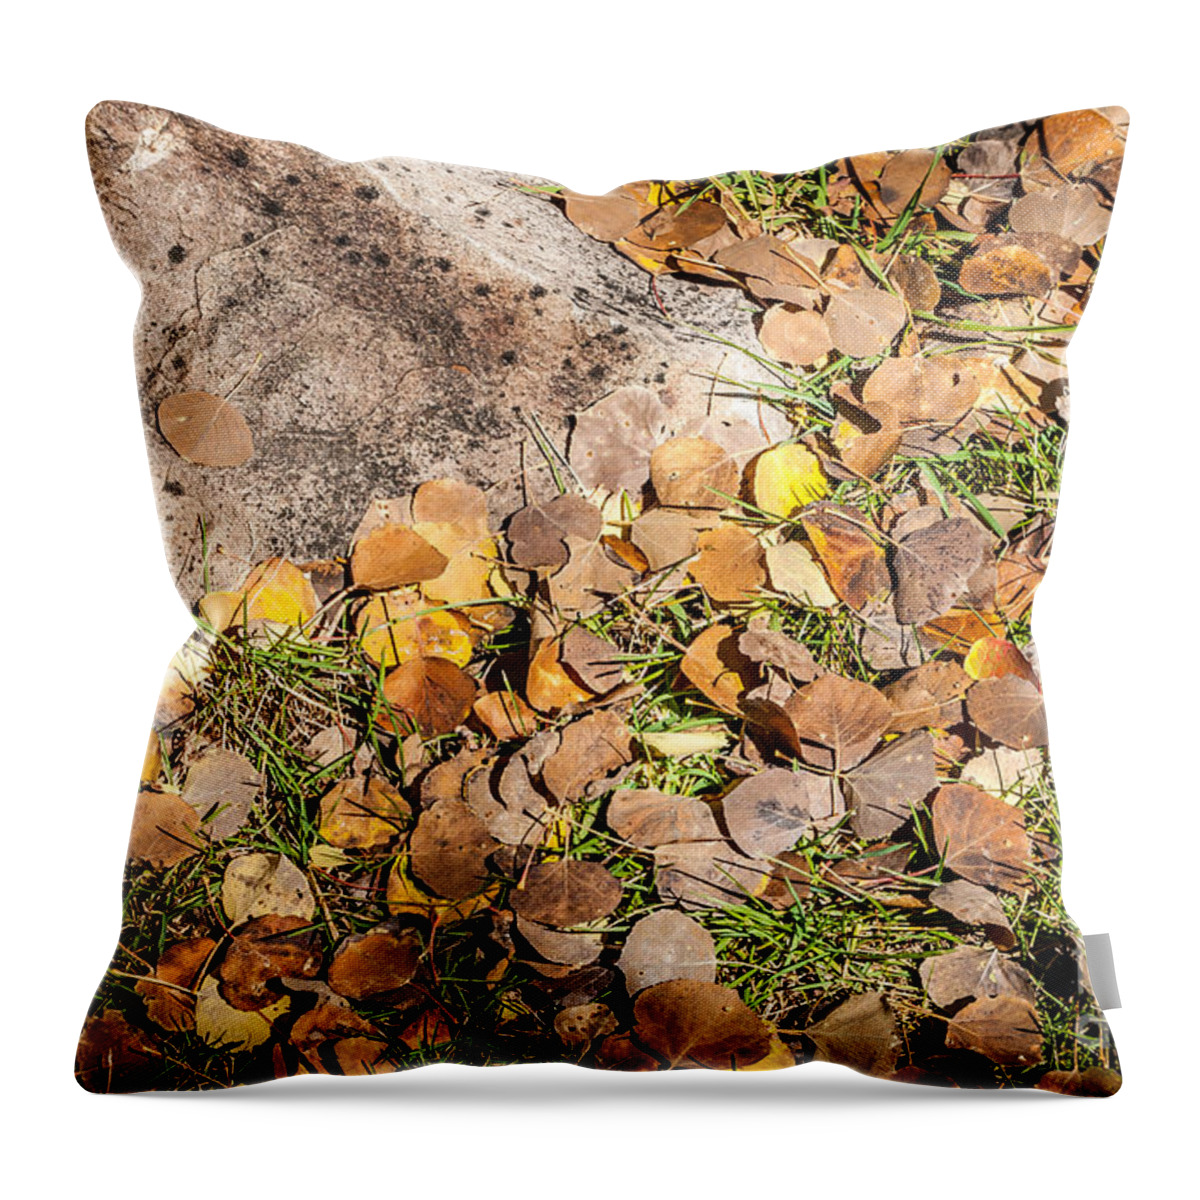 Bob And Nancy Kendrick Throw Pillow featuring the photograph Aspen Remains by Bob and Nancy Kendrick